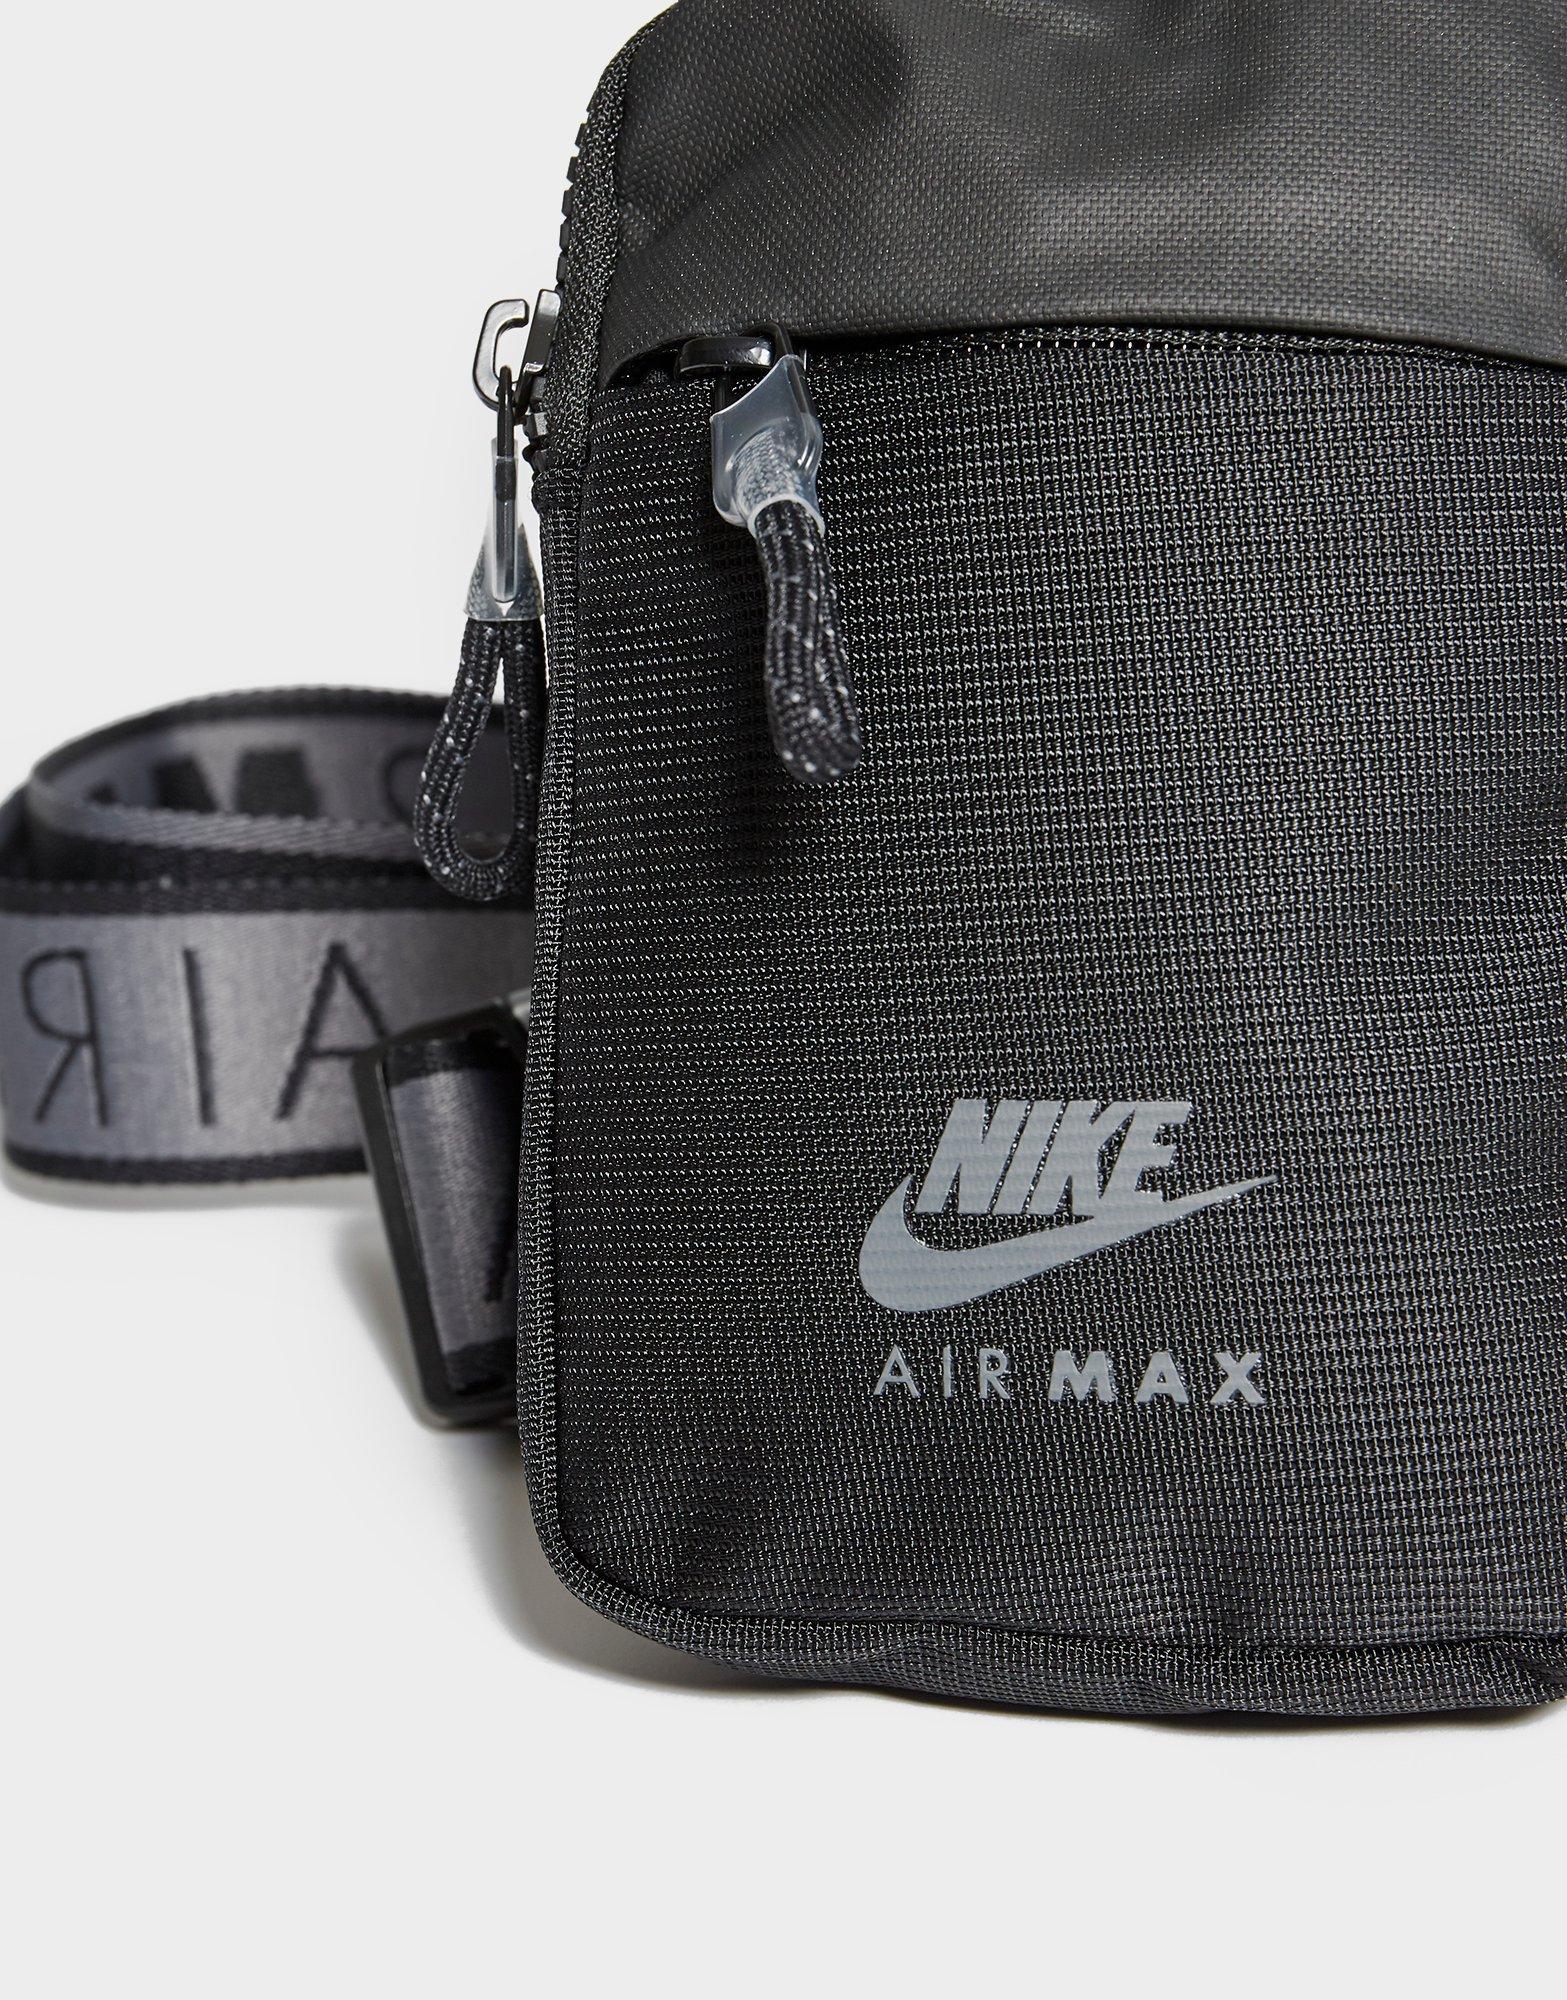 nike air max bag,Save up to 15%,www.ilcascinone.com